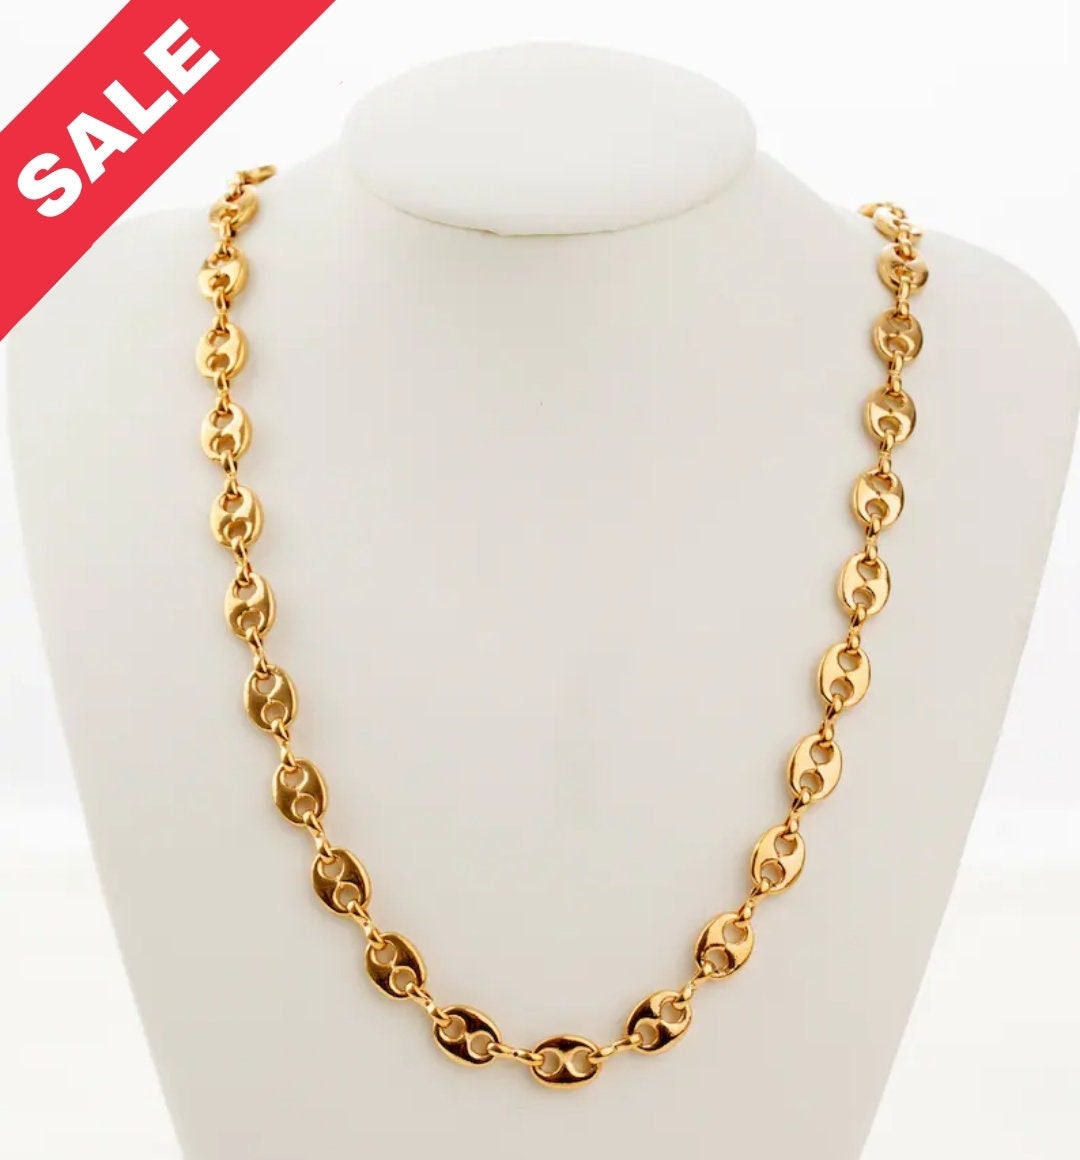 Channel cable looking link chain 18k Gold Plated 6mm chain sold by foot for jewelry making gfc108